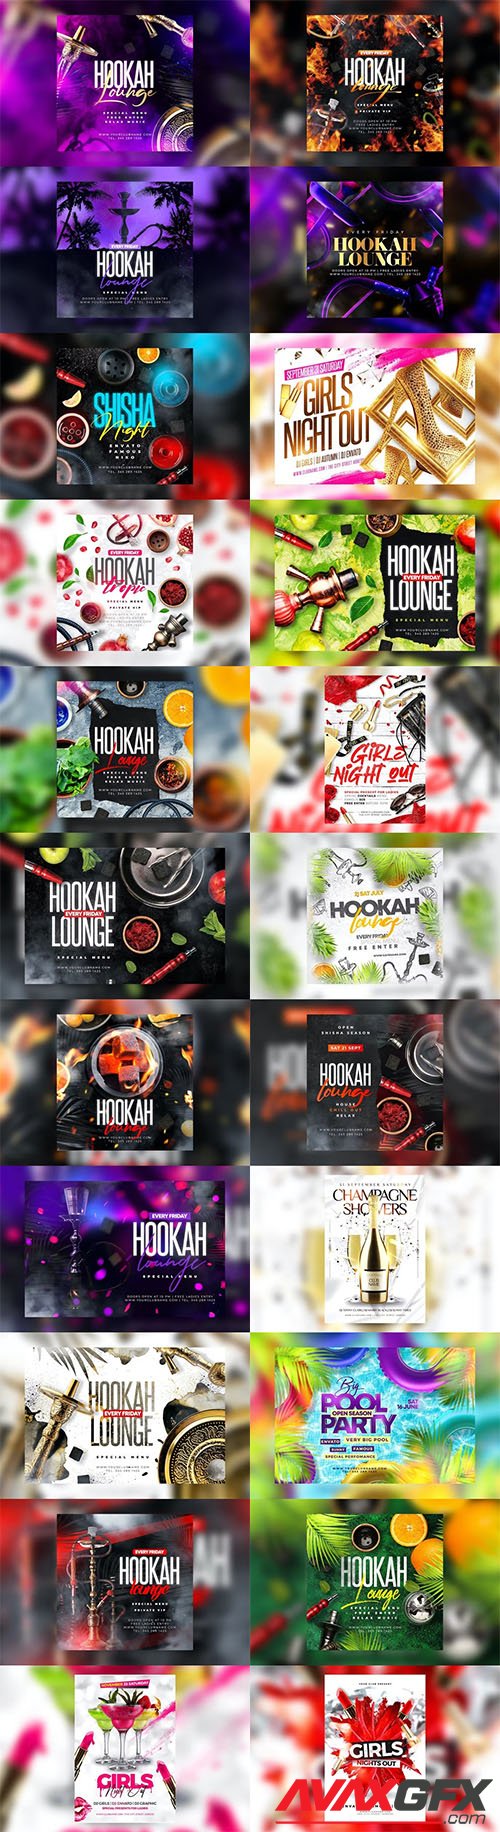 Hookah Lounge and Girls Night Out Flyers Pack